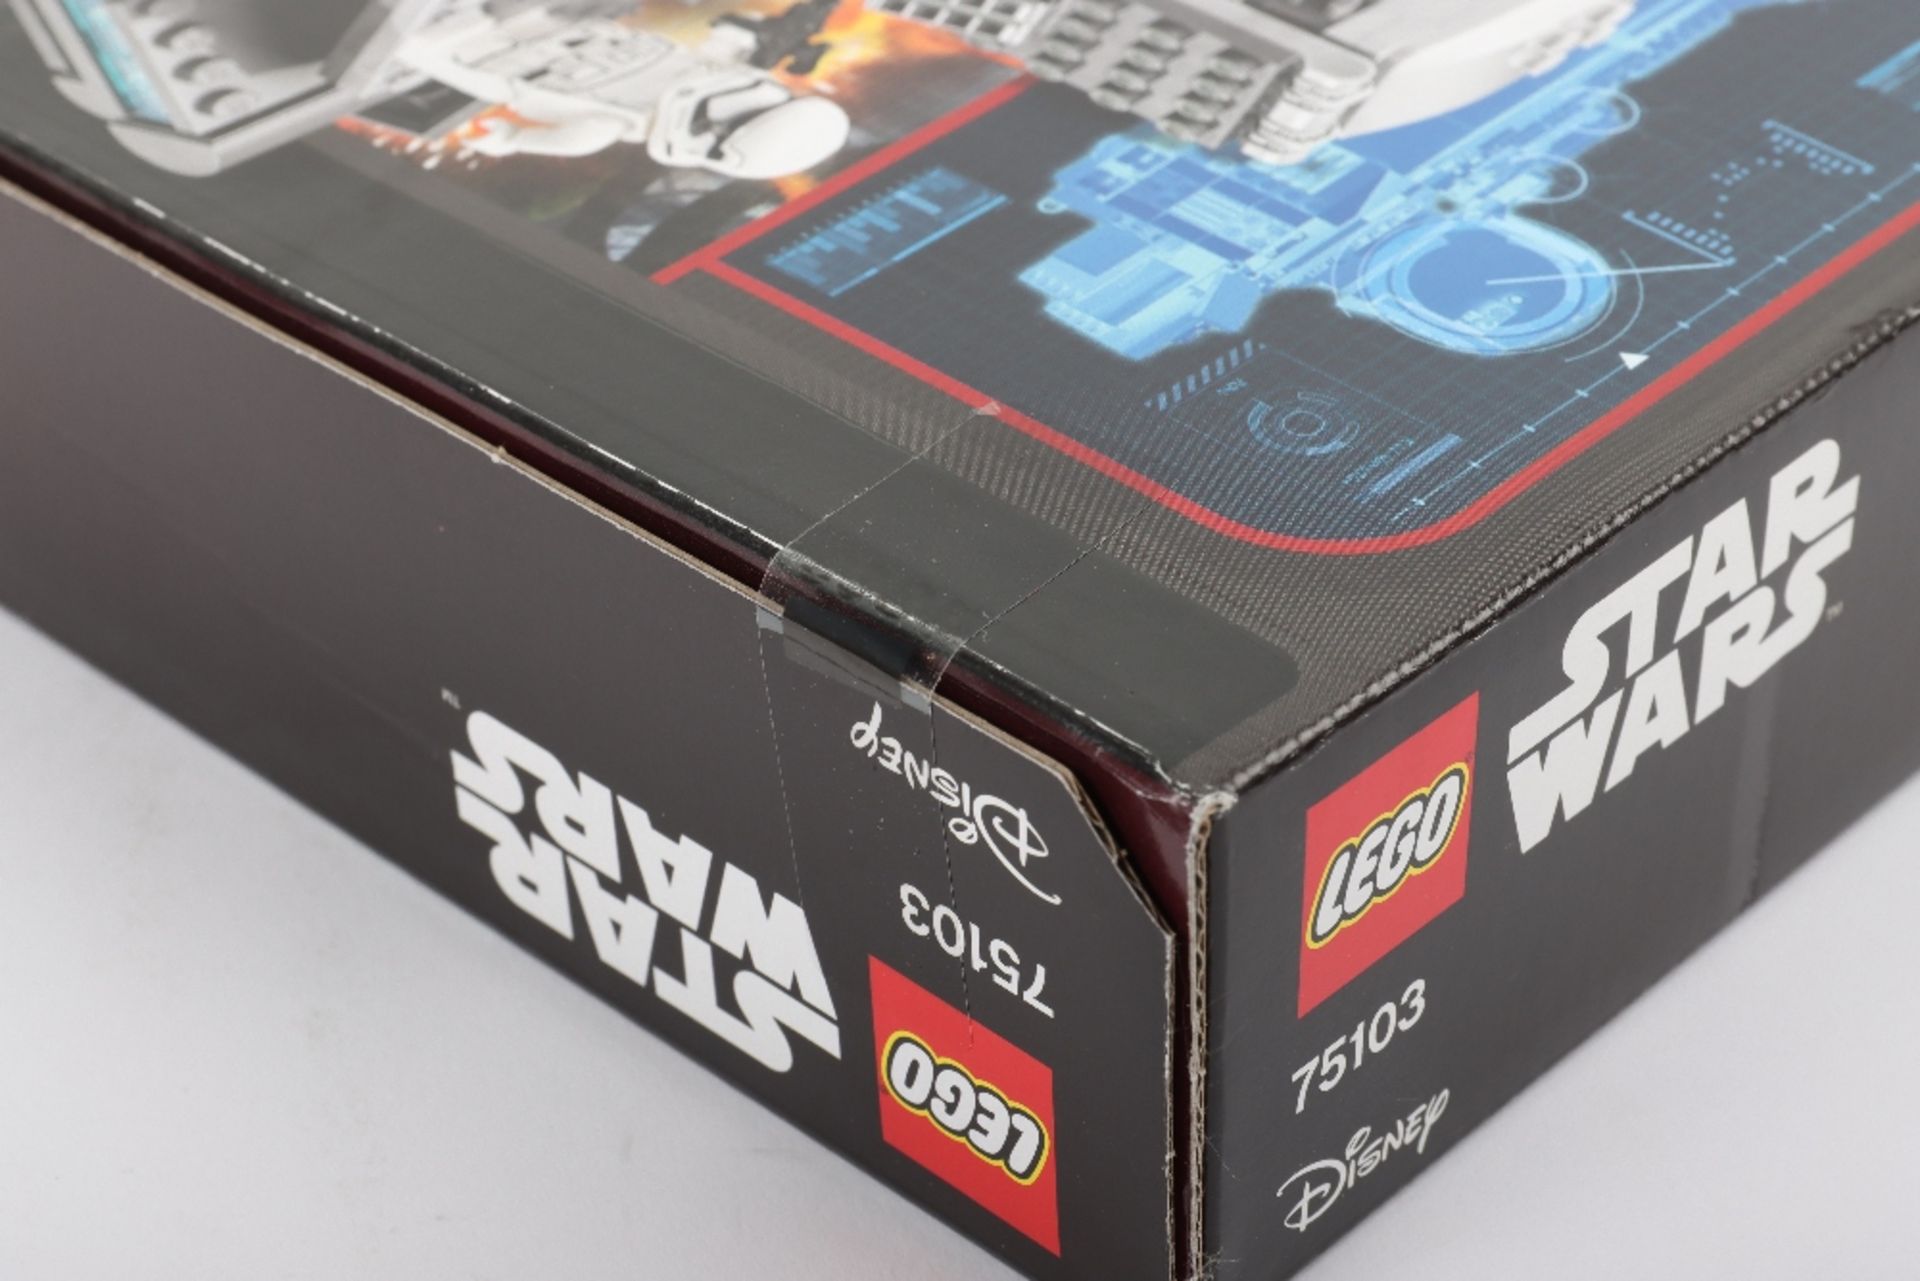 Lego Star Wars 75103 and 5002948 sealed boxed - Image 3 of 11